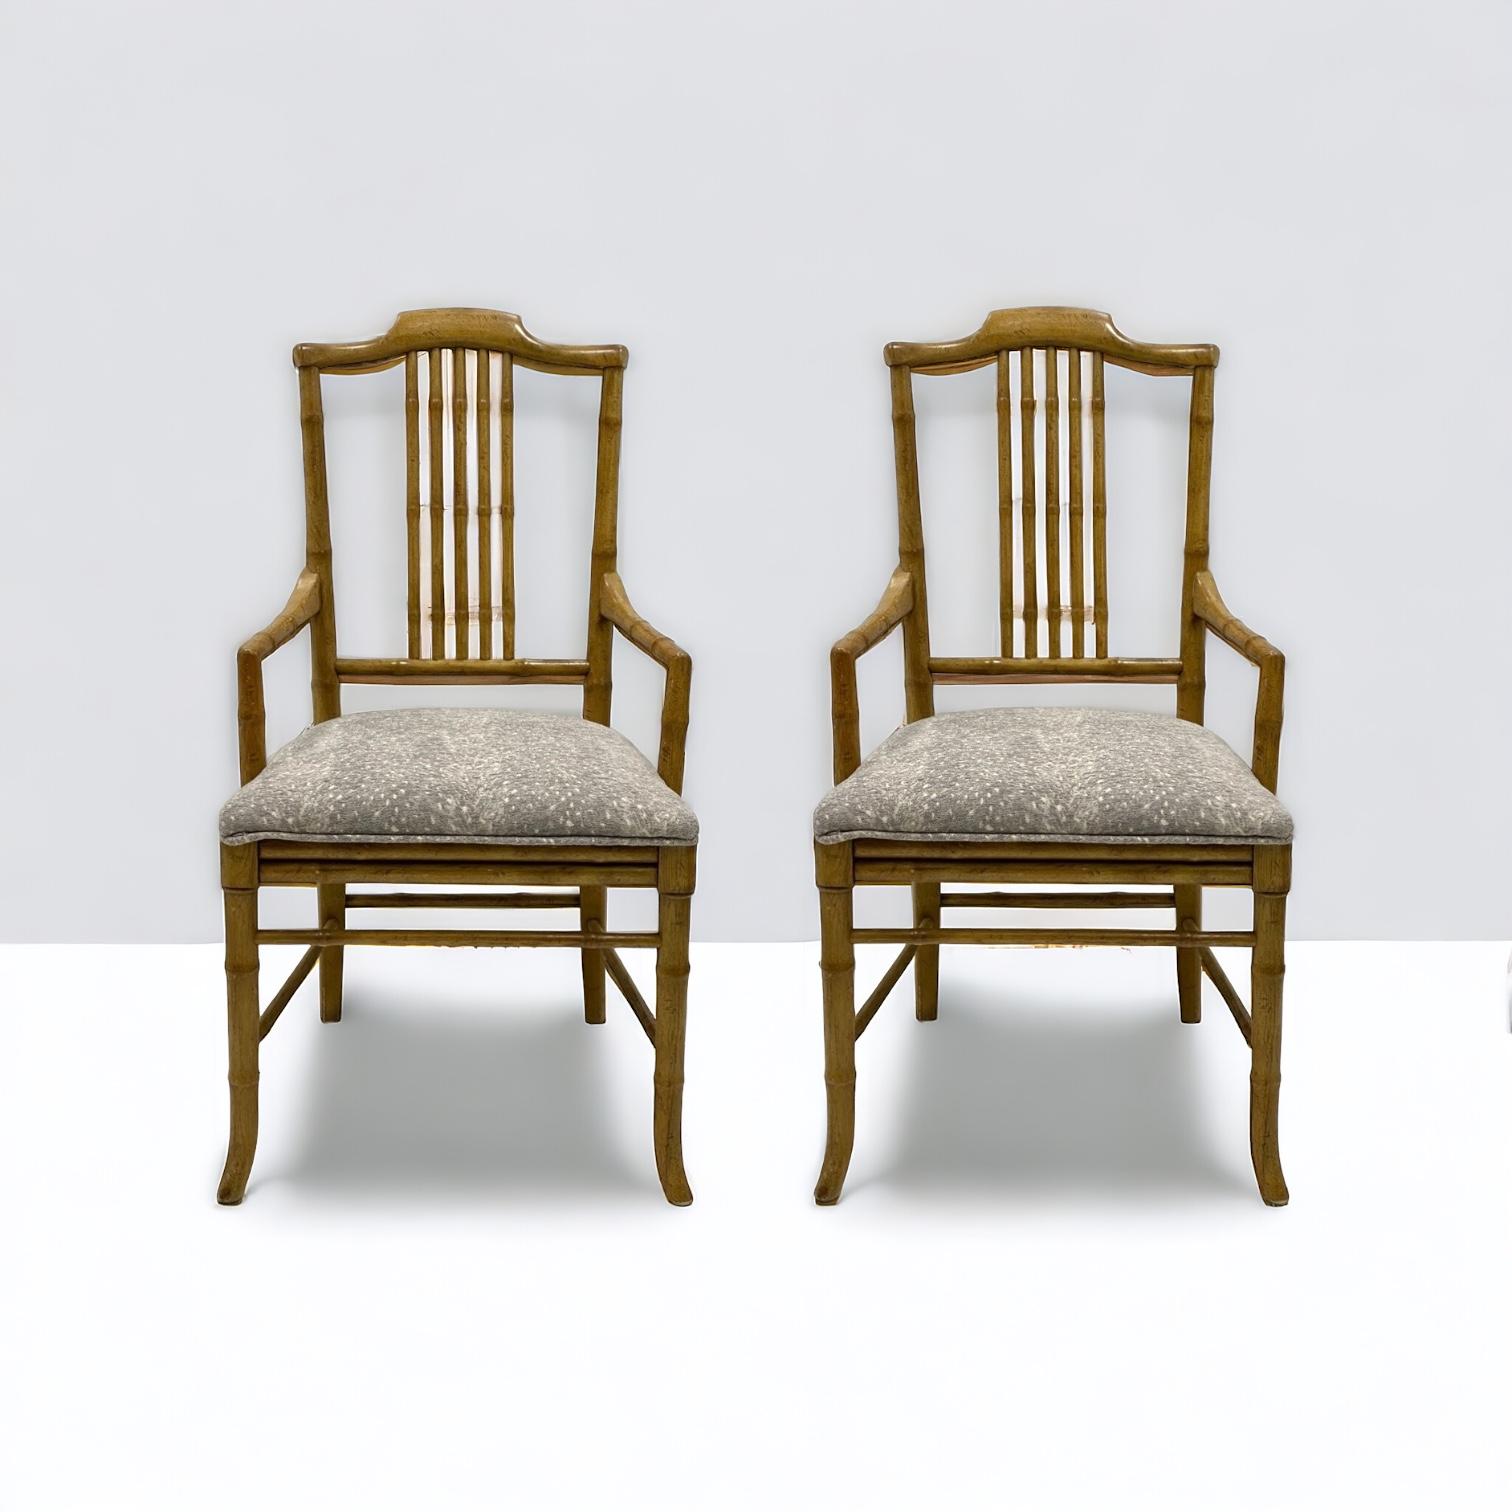 1970s Regency Style Faux Bamboo Bergere Armchairs In Grey Fawn Upholstery -Pair For Sale 5